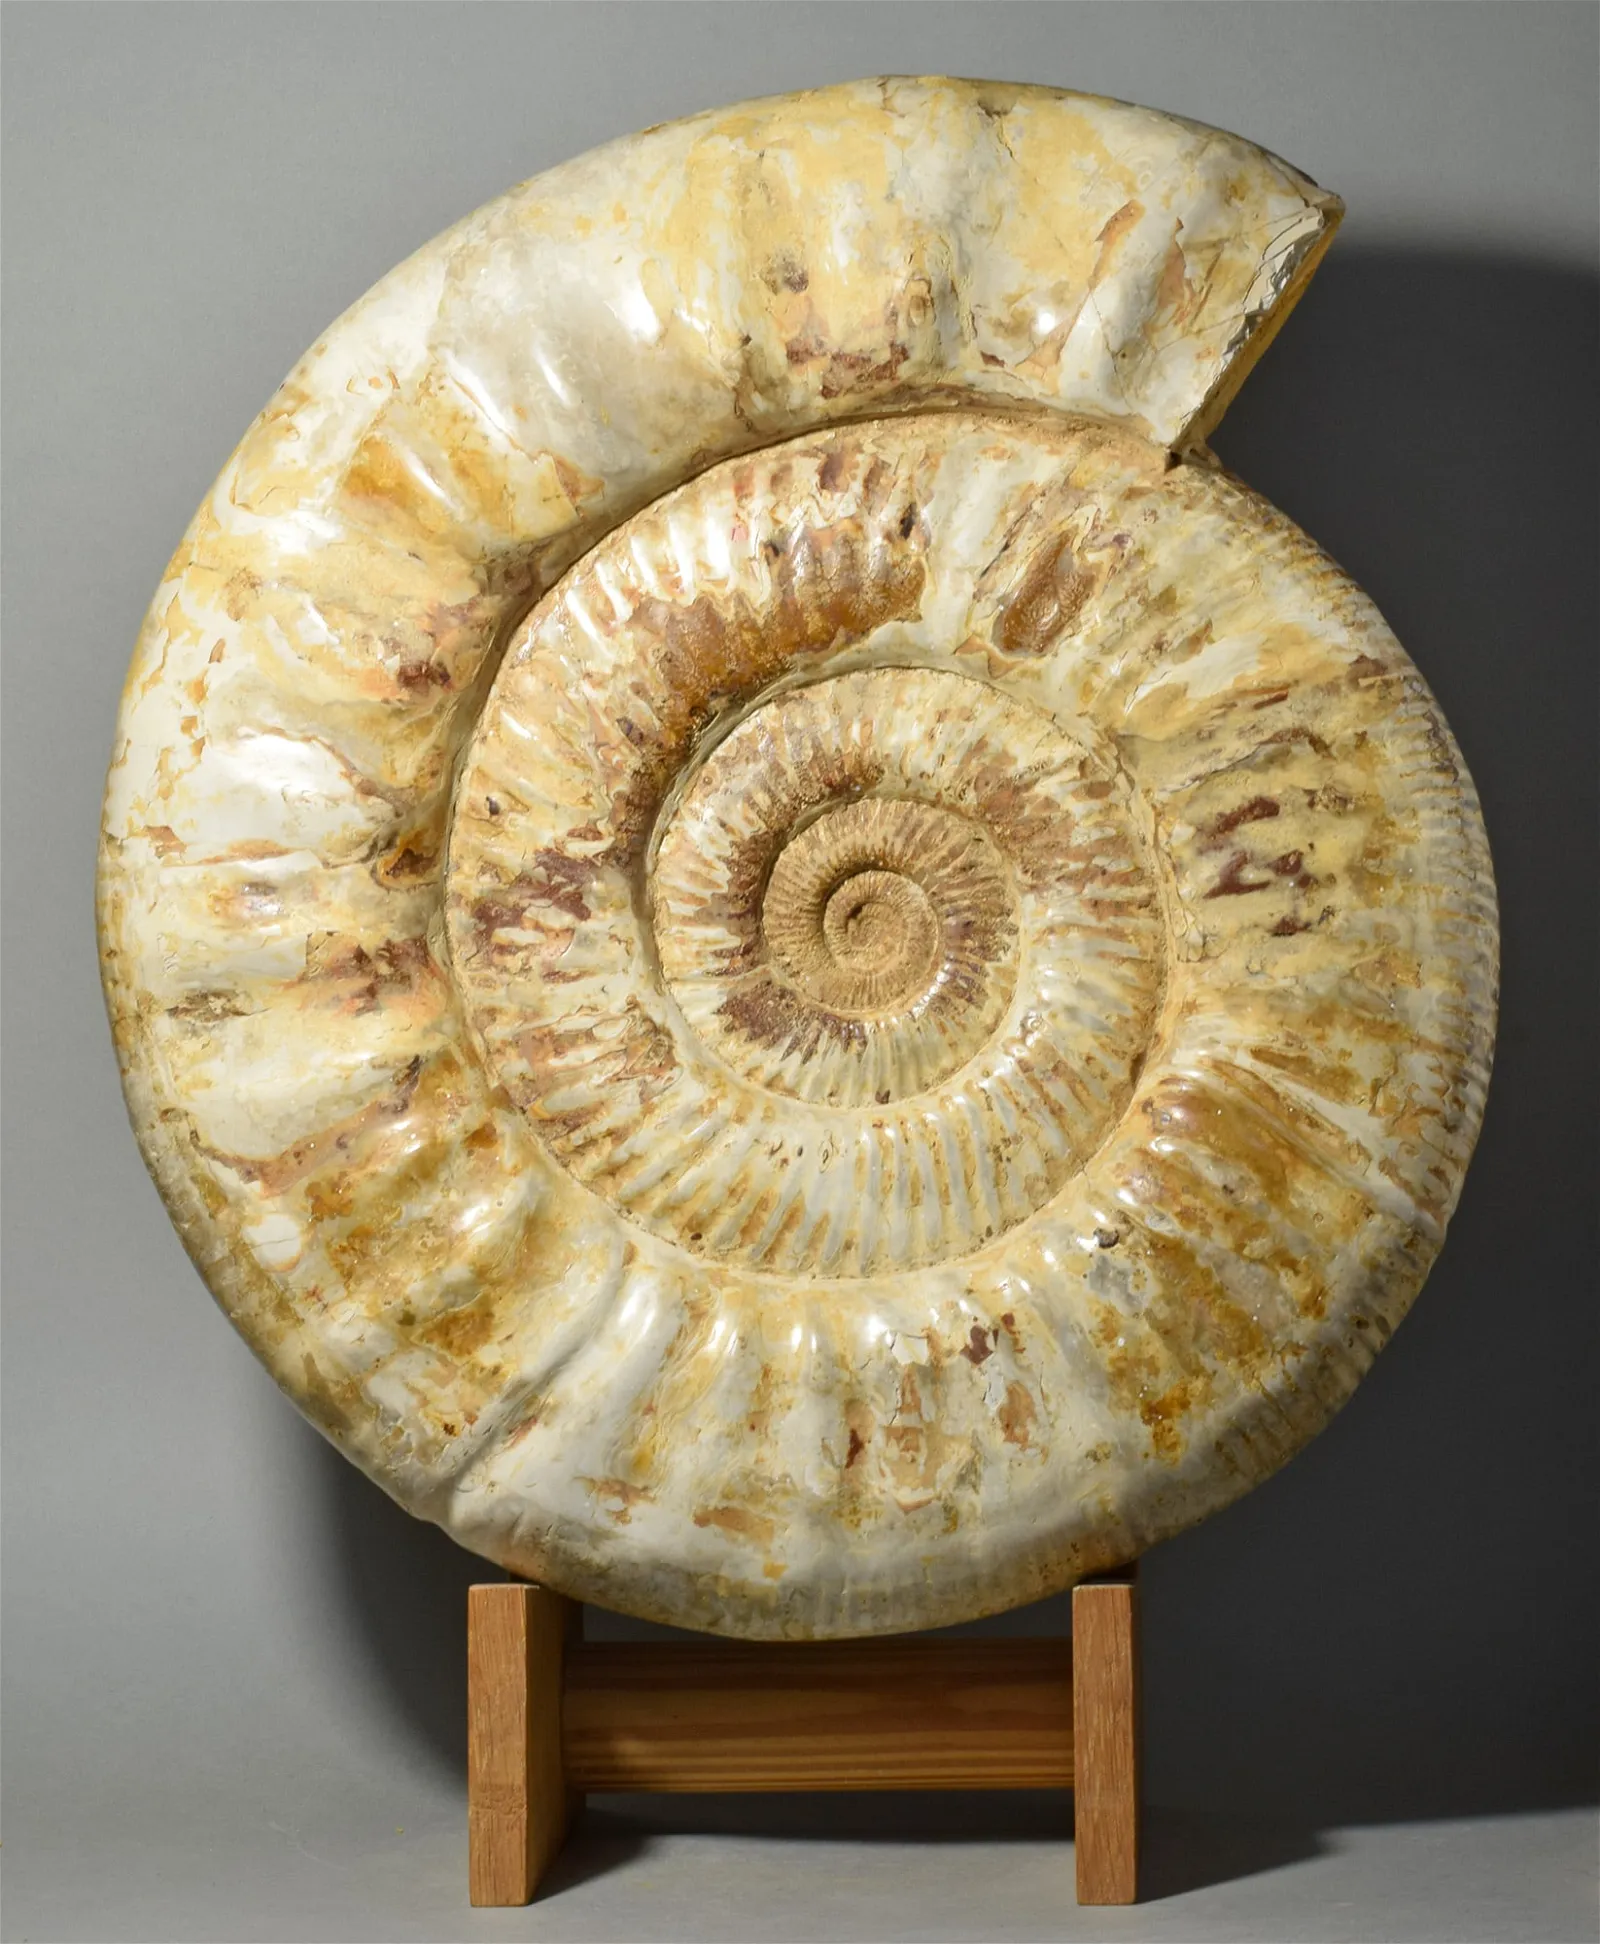 Ancient fossils become decorative art for the home at Jasper52 Nov. 22